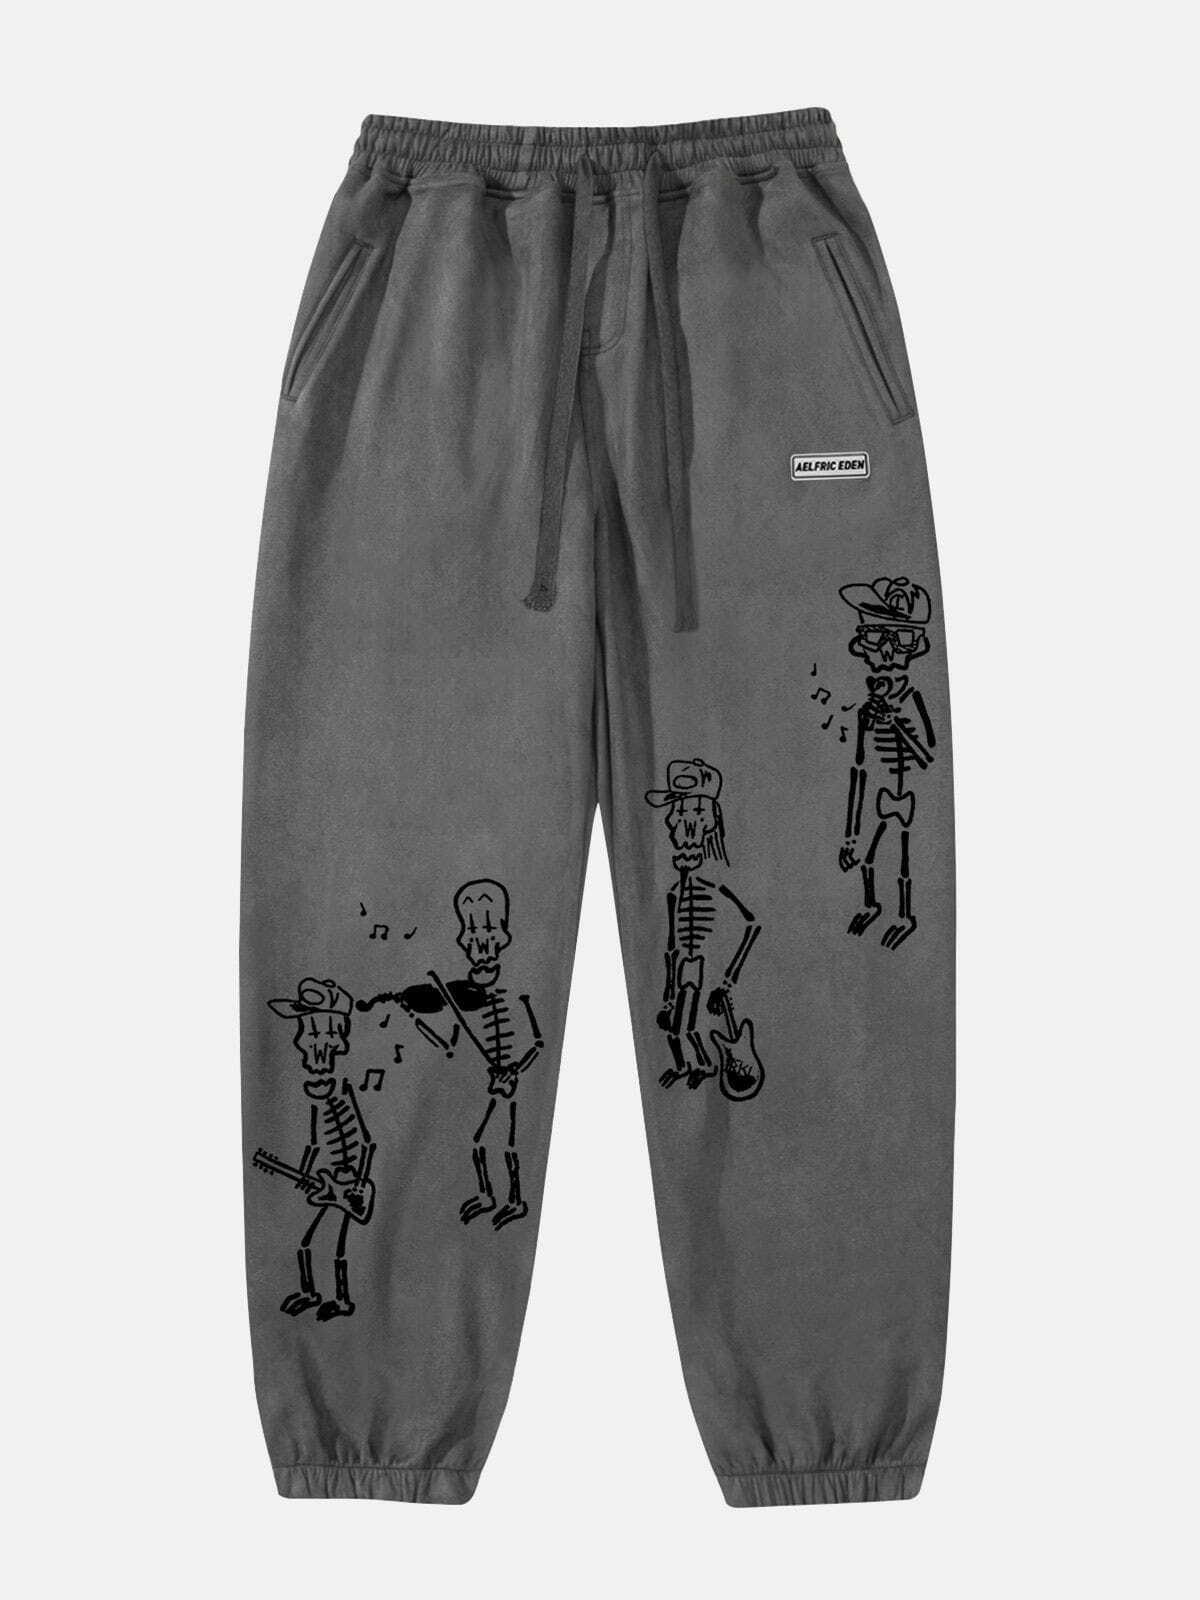 quirky people print sweatpants   youthful urban comfort 6535